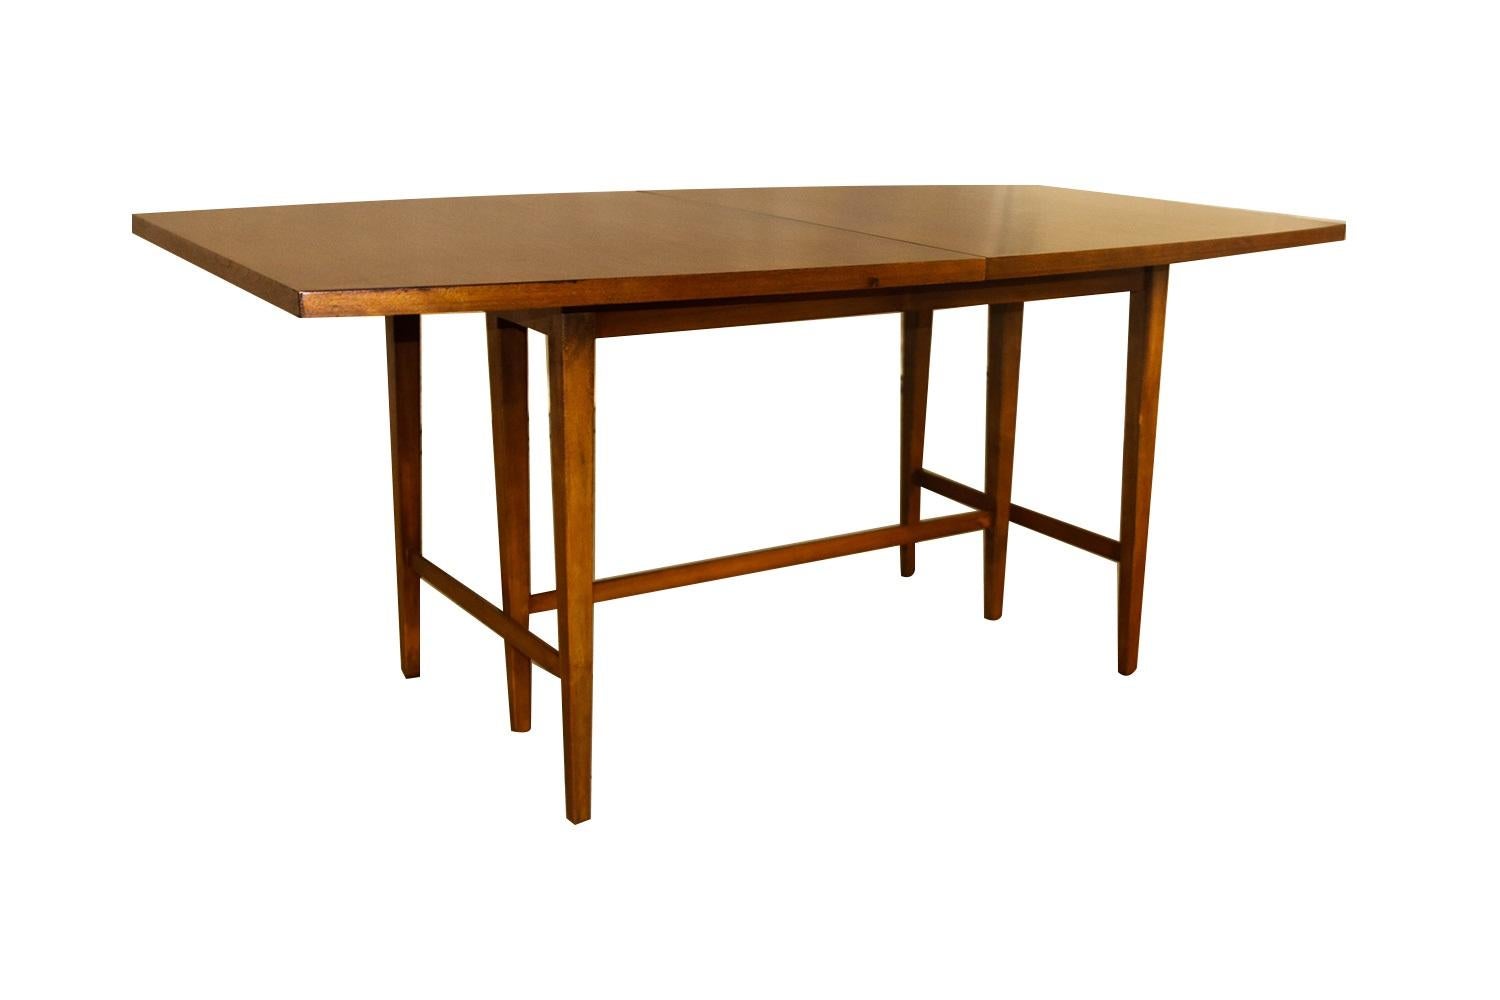 Maple Midcentury Paul McCobb Planner Group Extendable Dining Table